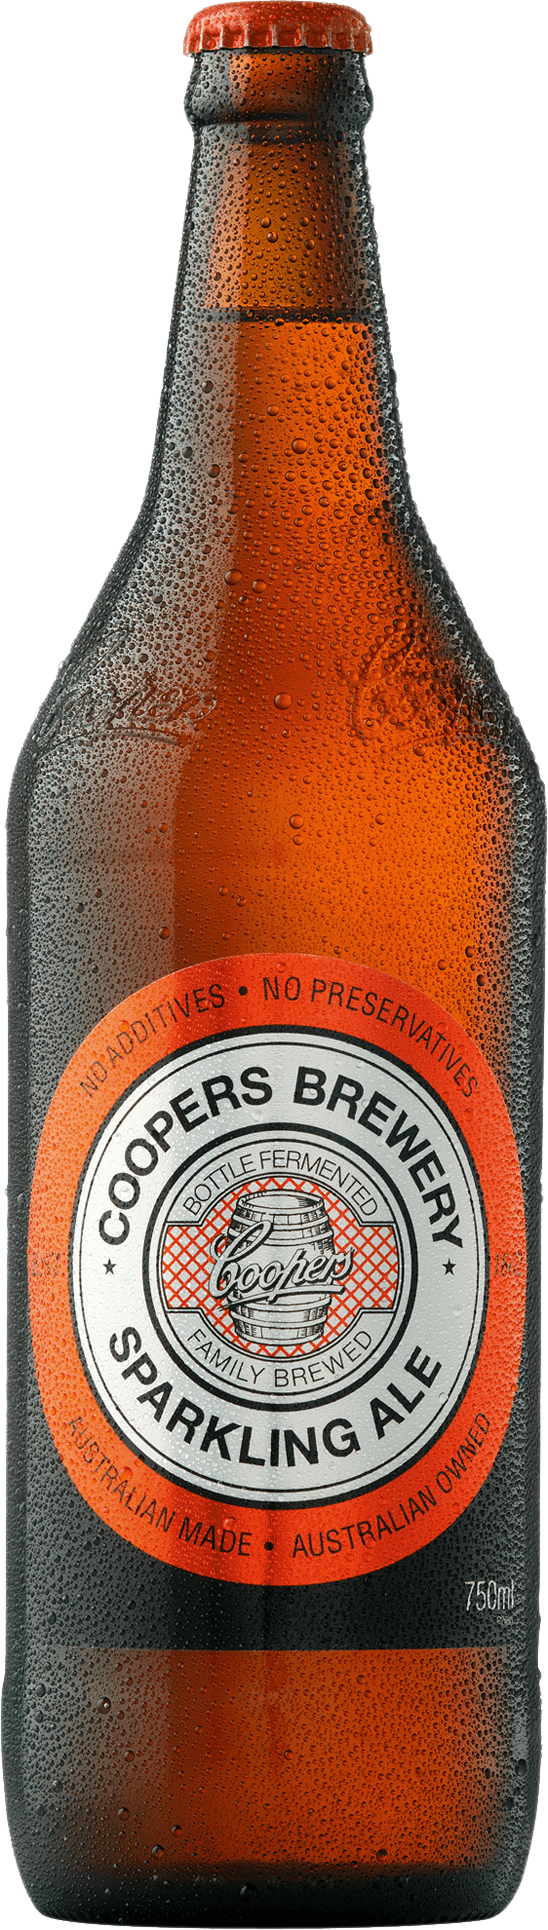 Coopers - Sparkling Ale (Red) / 750mL / Bottles